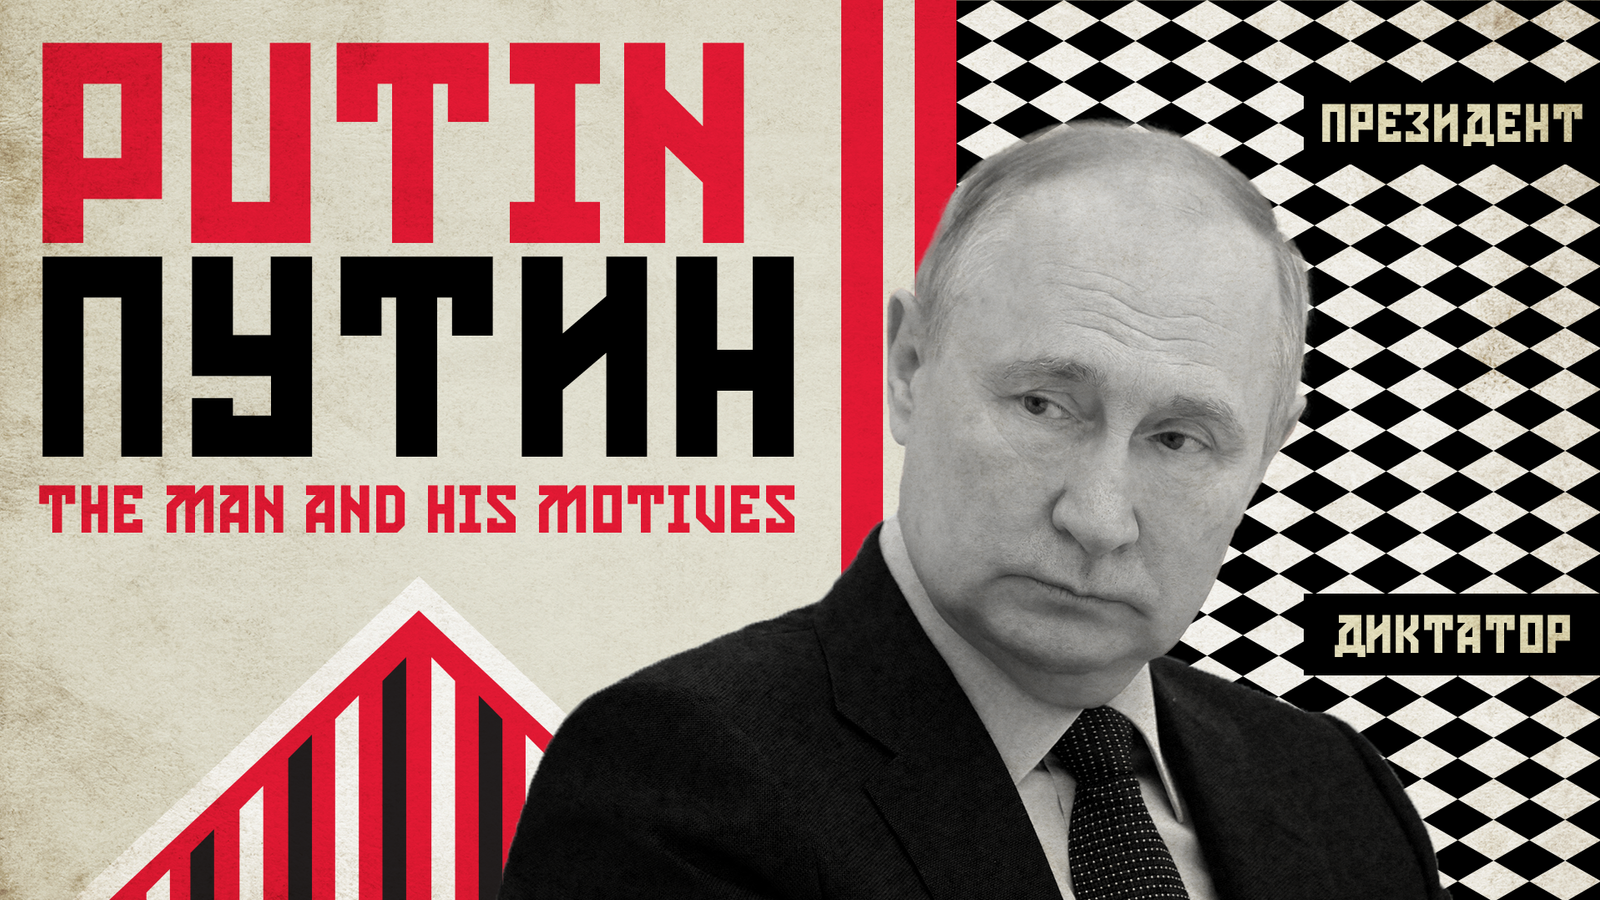 Putin: The man and his motives - what we know about the Russian dictator